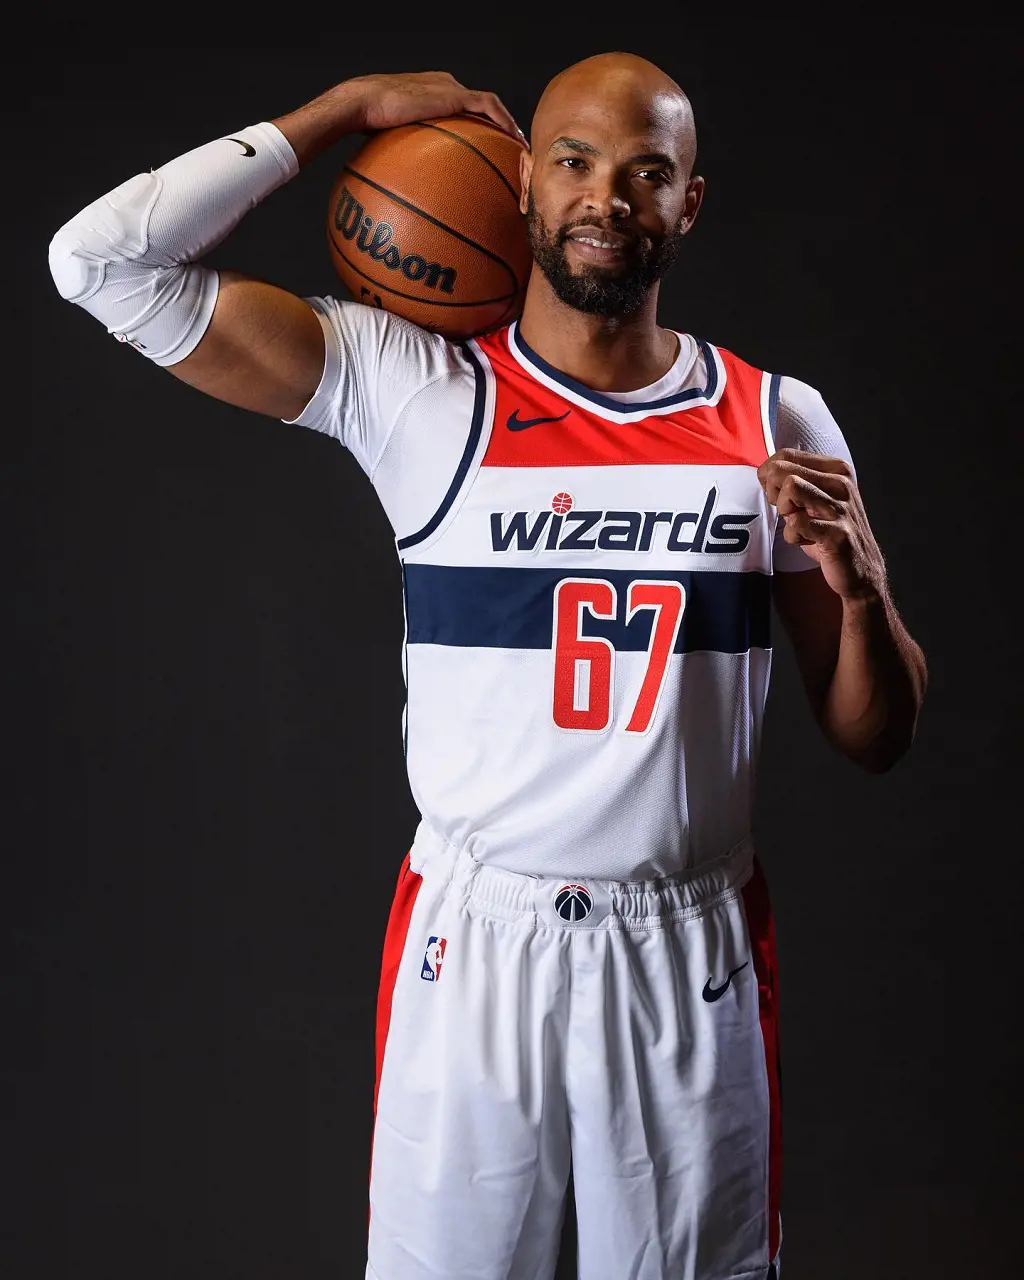 A picture of Taj Gibson with Washington Wizards posted by the player himself on Instagram